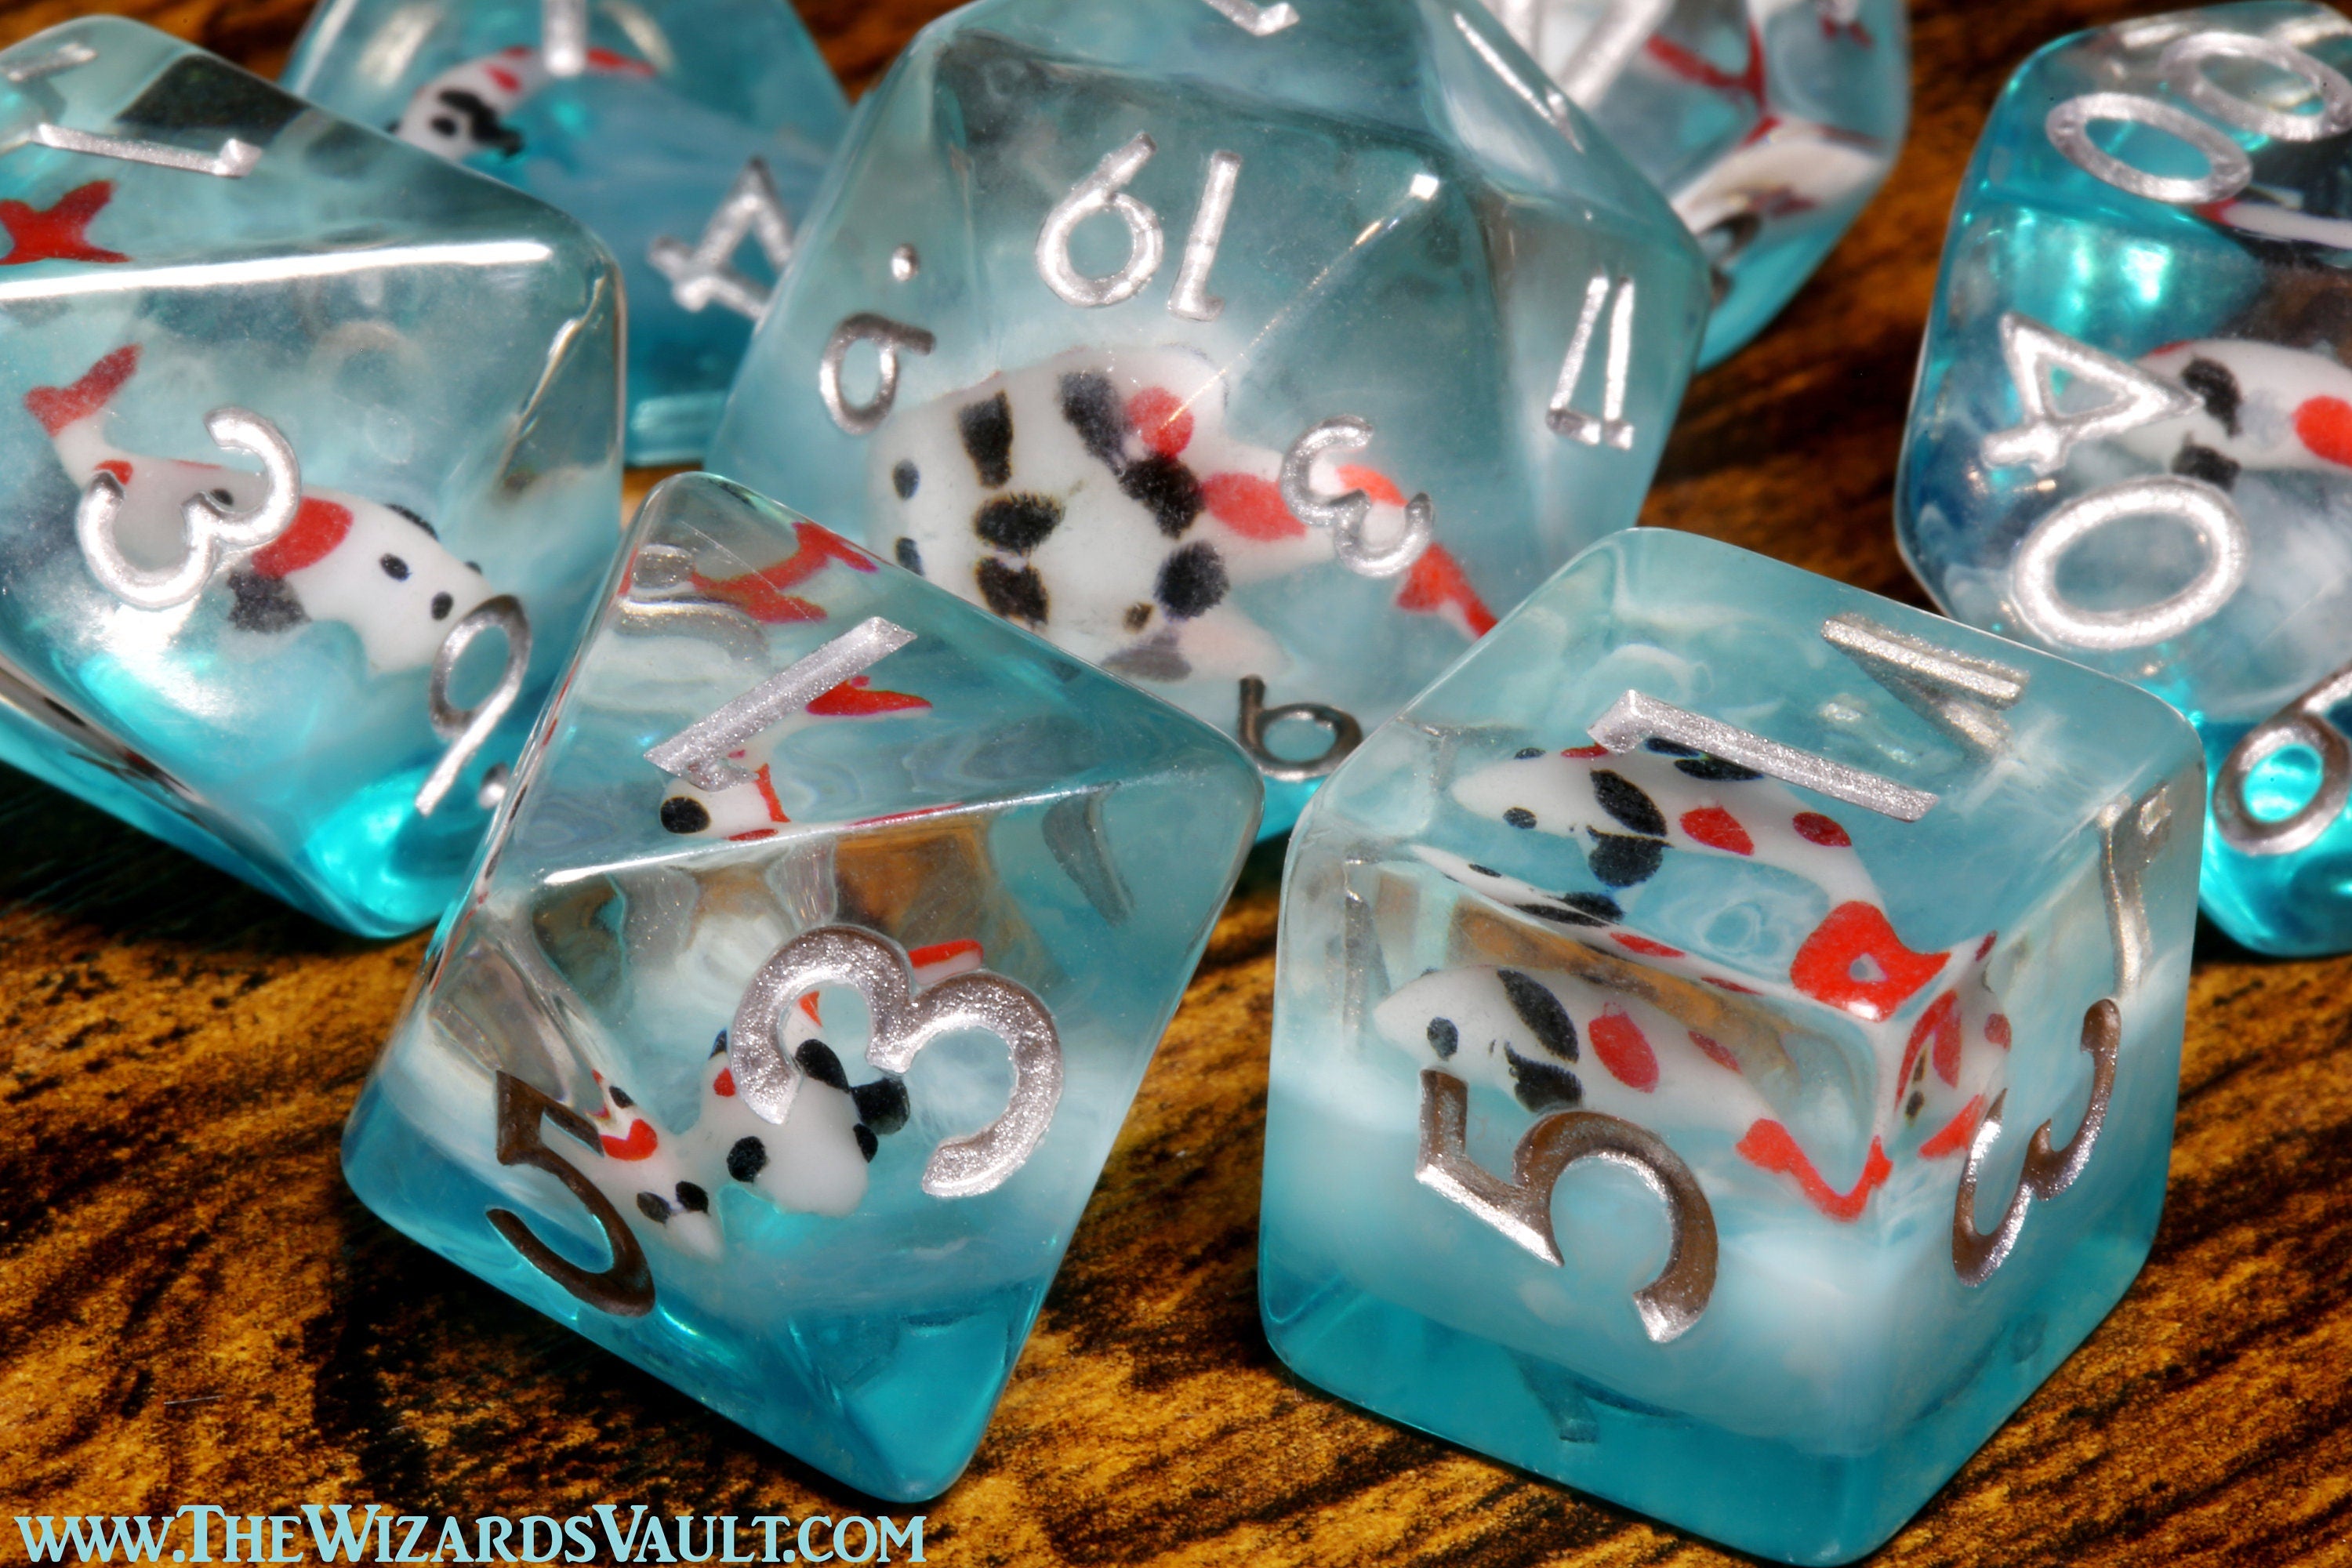 Ocean Koi dice set - DND Dice set with small fish on a blue layer - The Wizard's Vault